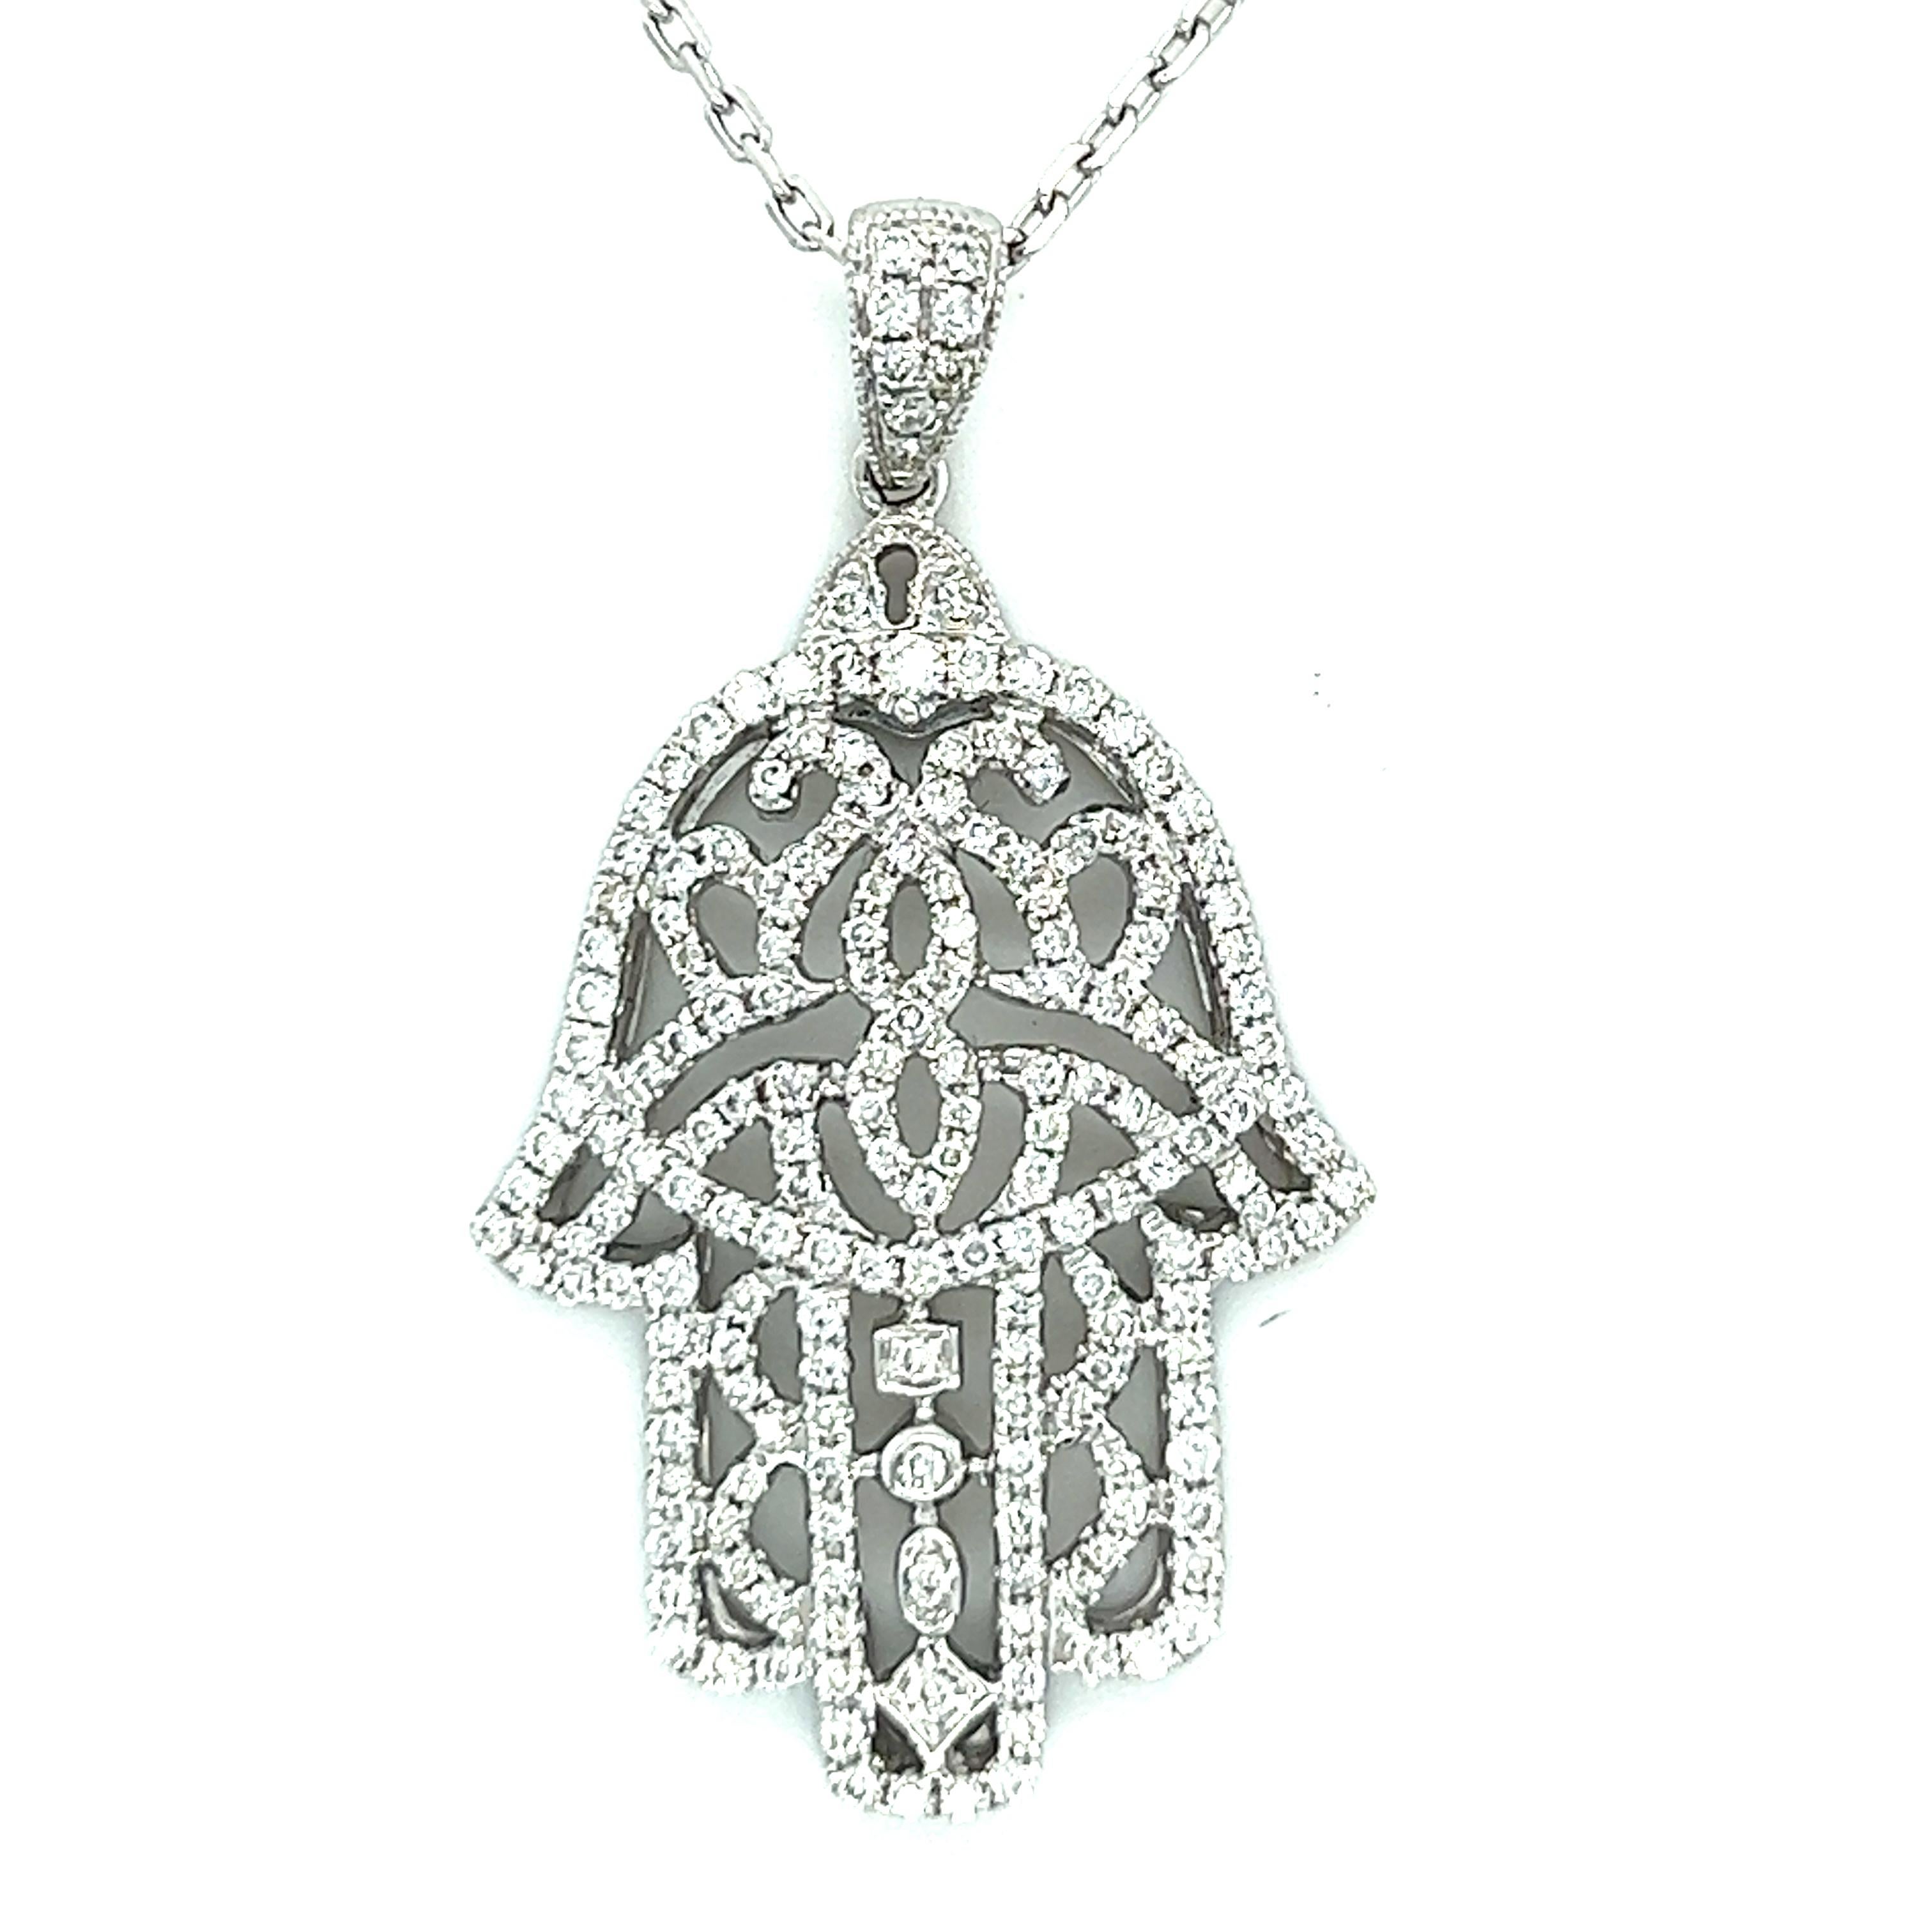 18 K White Gold Diamonds Protection Hand Necklace

186 Diamonds 1.08 CT
18 K White Gold 8.09 GM

Bring a bit of good luck and protection into your life with this 18 K White Gold Diamonds Protection Hand Necklace.

Whether you want to wear it on its